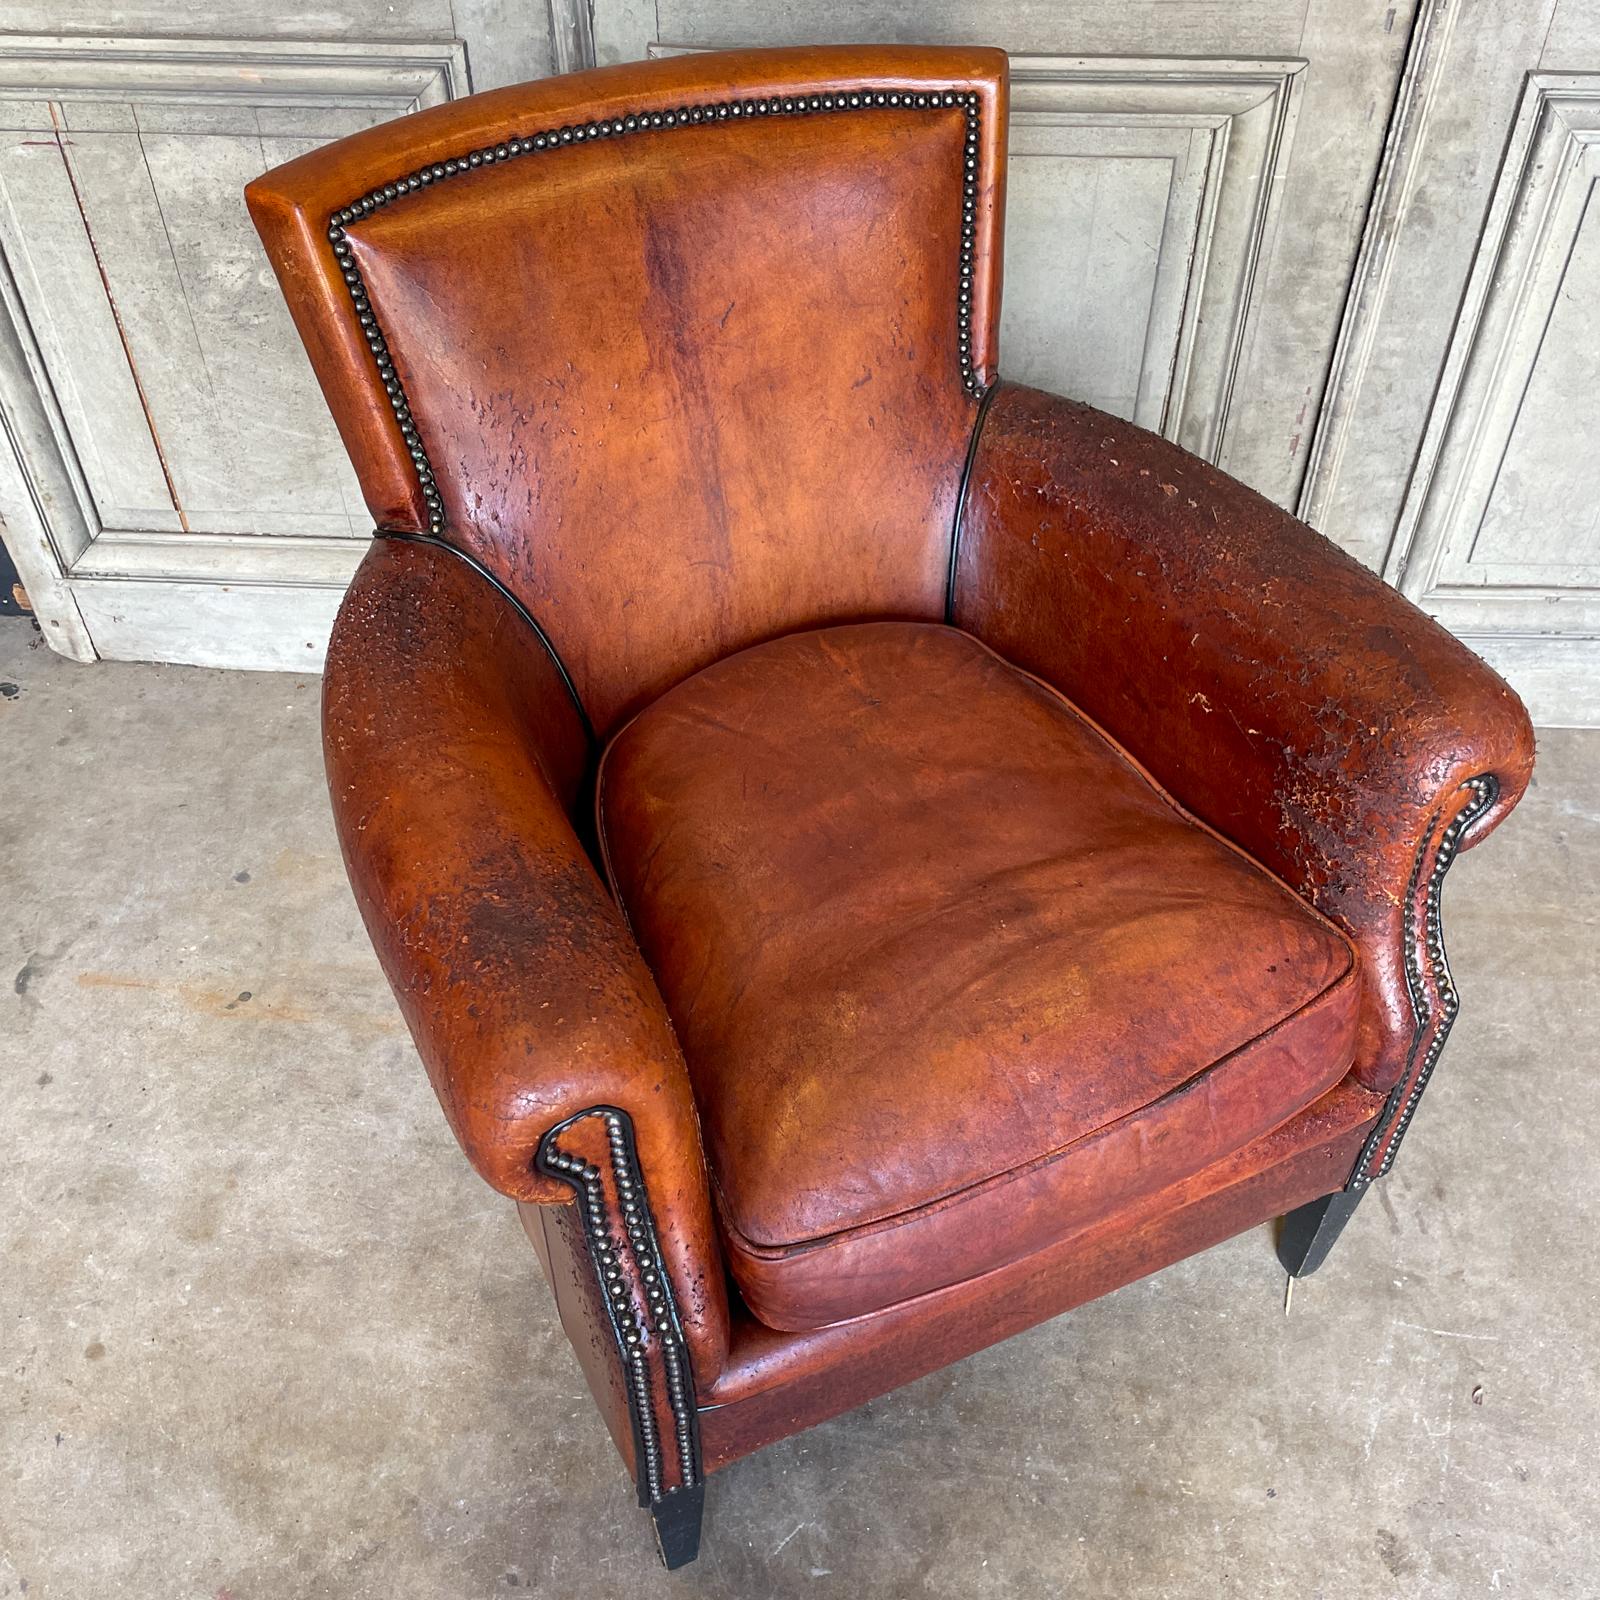 This vintage European leather club chair features richly patinated leather and brass nailhead detail. The feet are wood and slightly tapered. The style of this armchair is perfect for floating in a space or tucked in a corner, as it's beautiful from